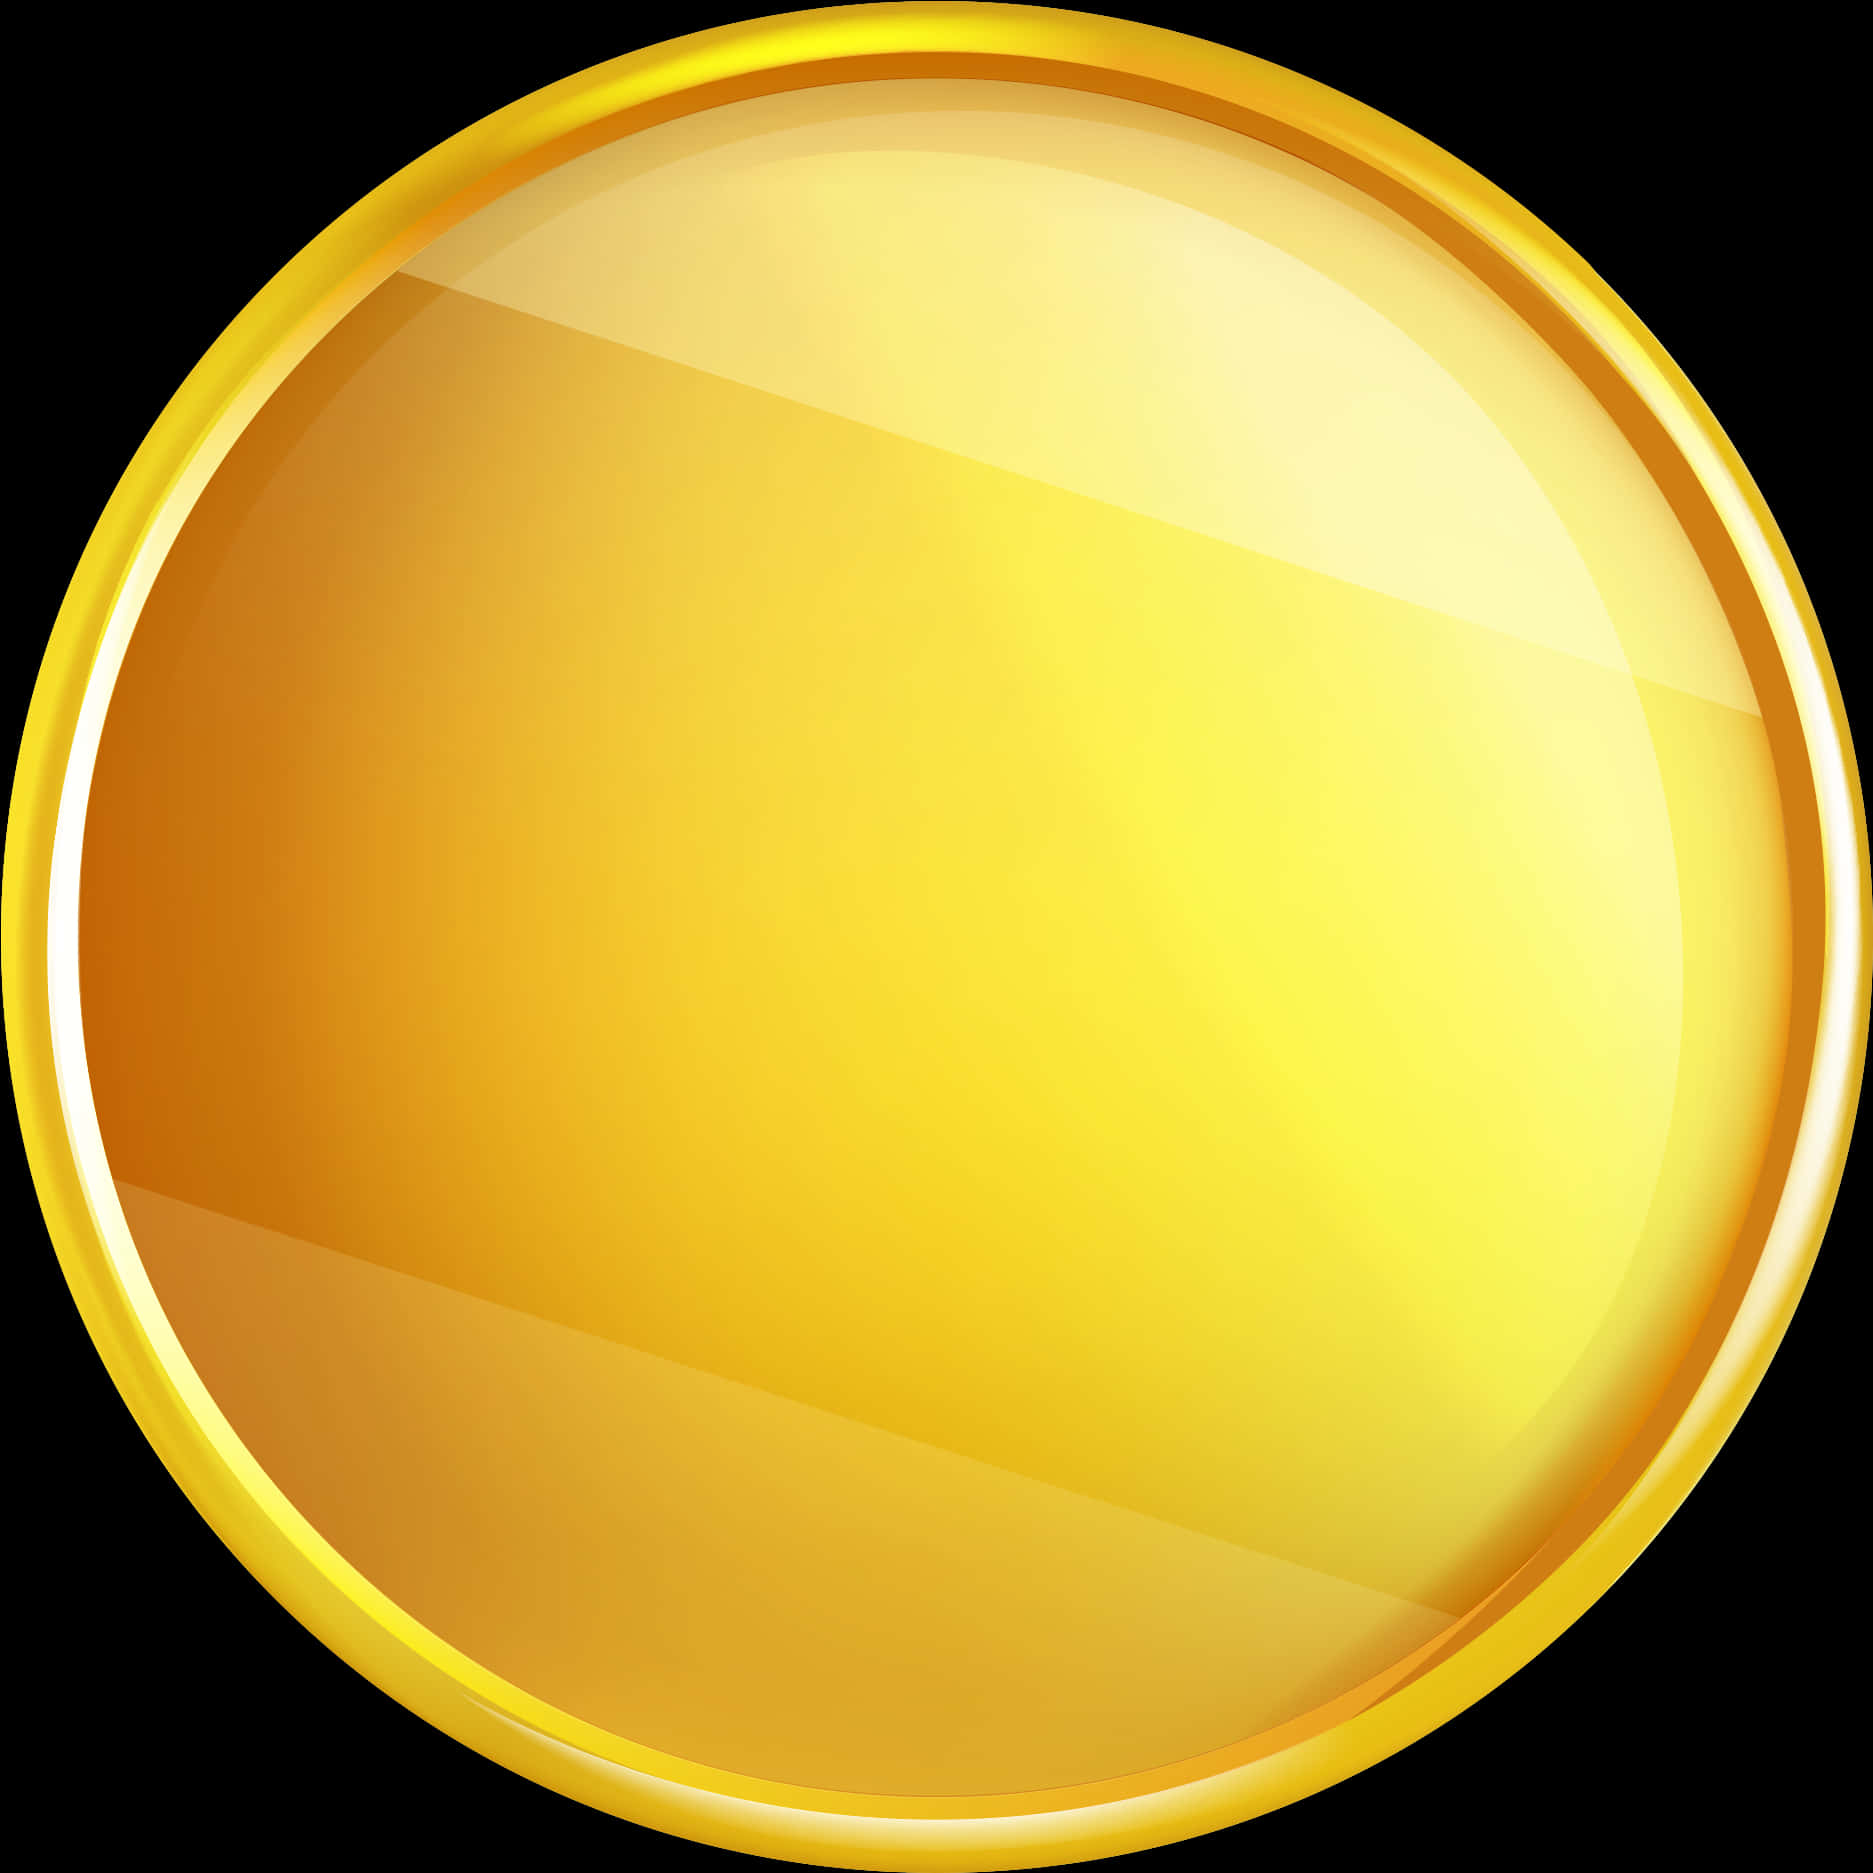 Shiny Gold Coin Graphic PNG